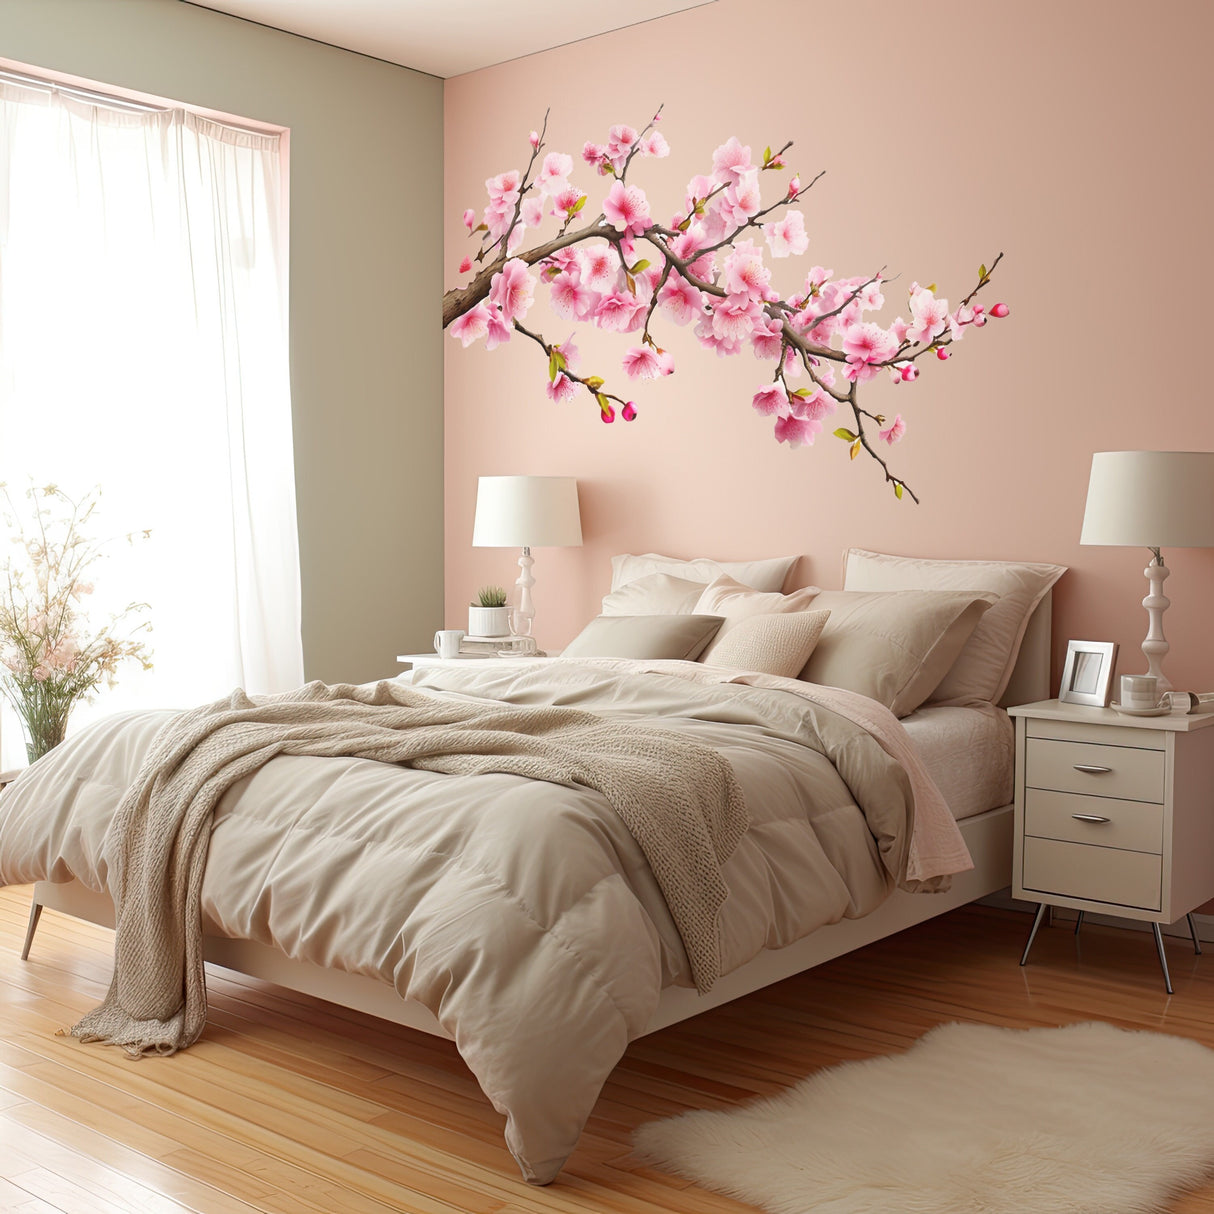 Cherry Blossom Corner Tree Wall Decal - Nursery Vinyl Sticker with Blossoms Pink Flowers Stickers